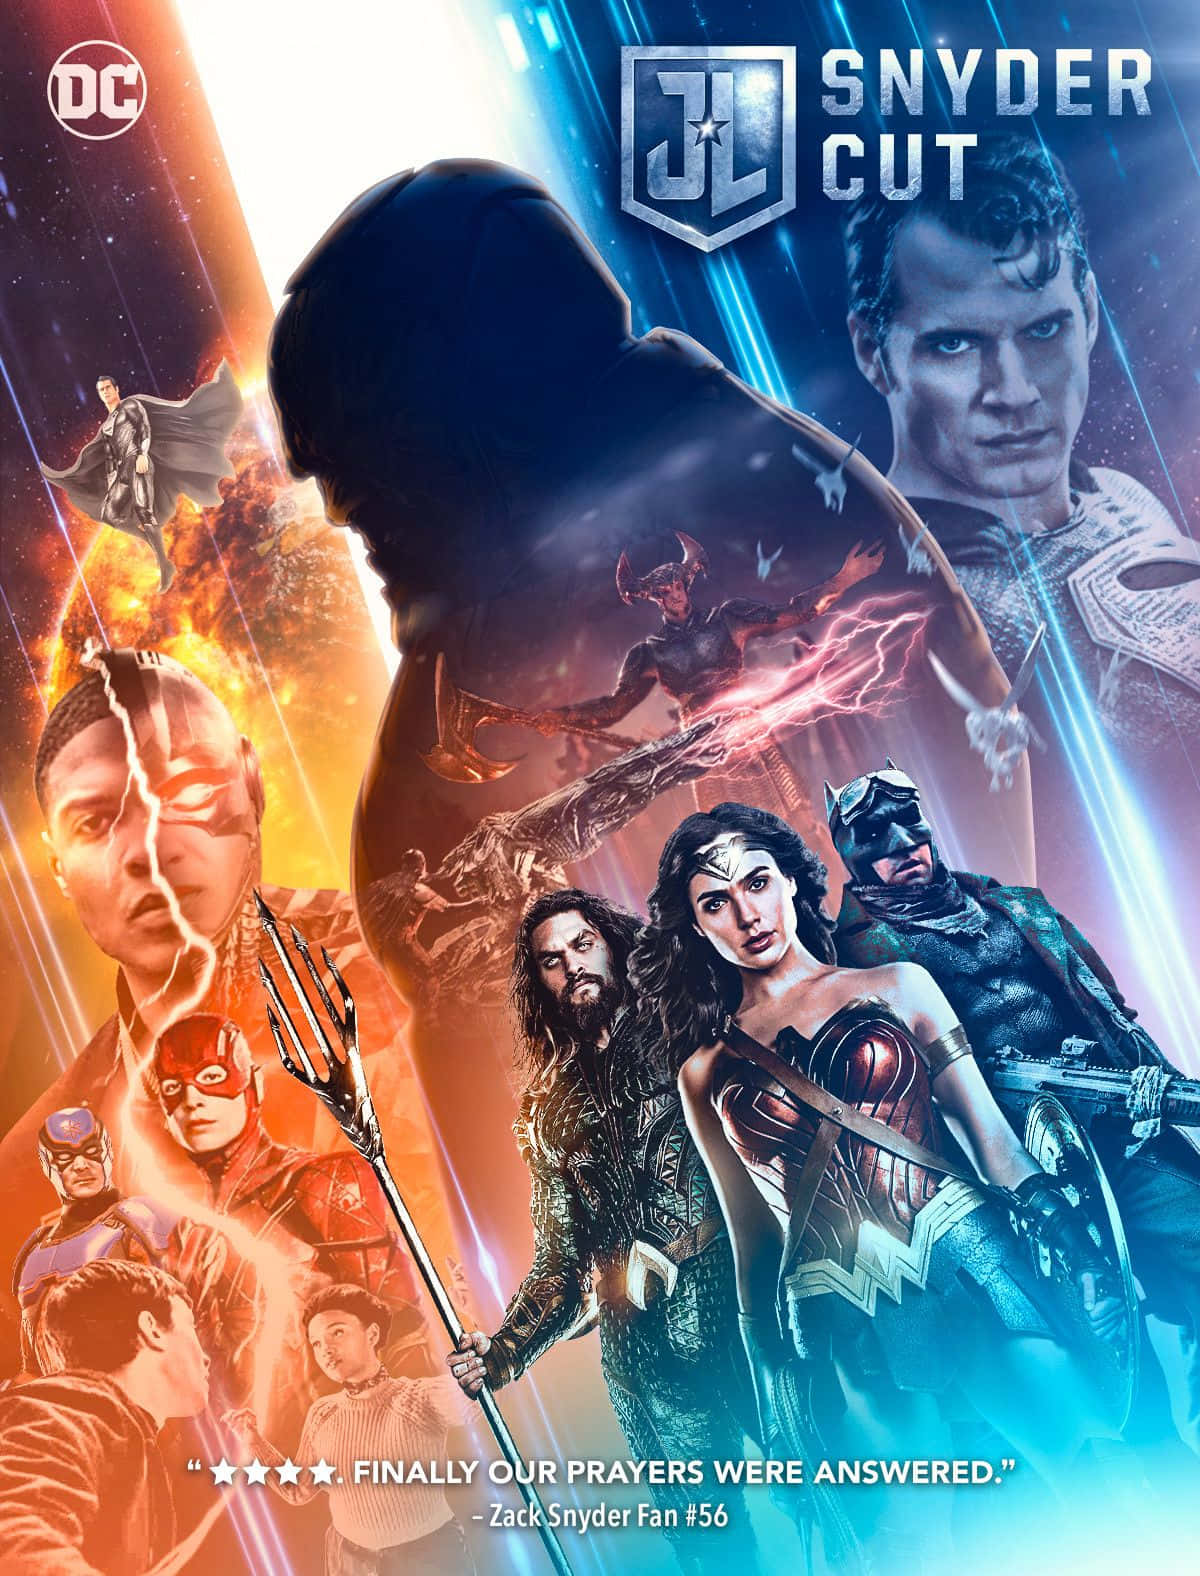 Become a hero and join Zack Snyder's Justice League. Wallpaper